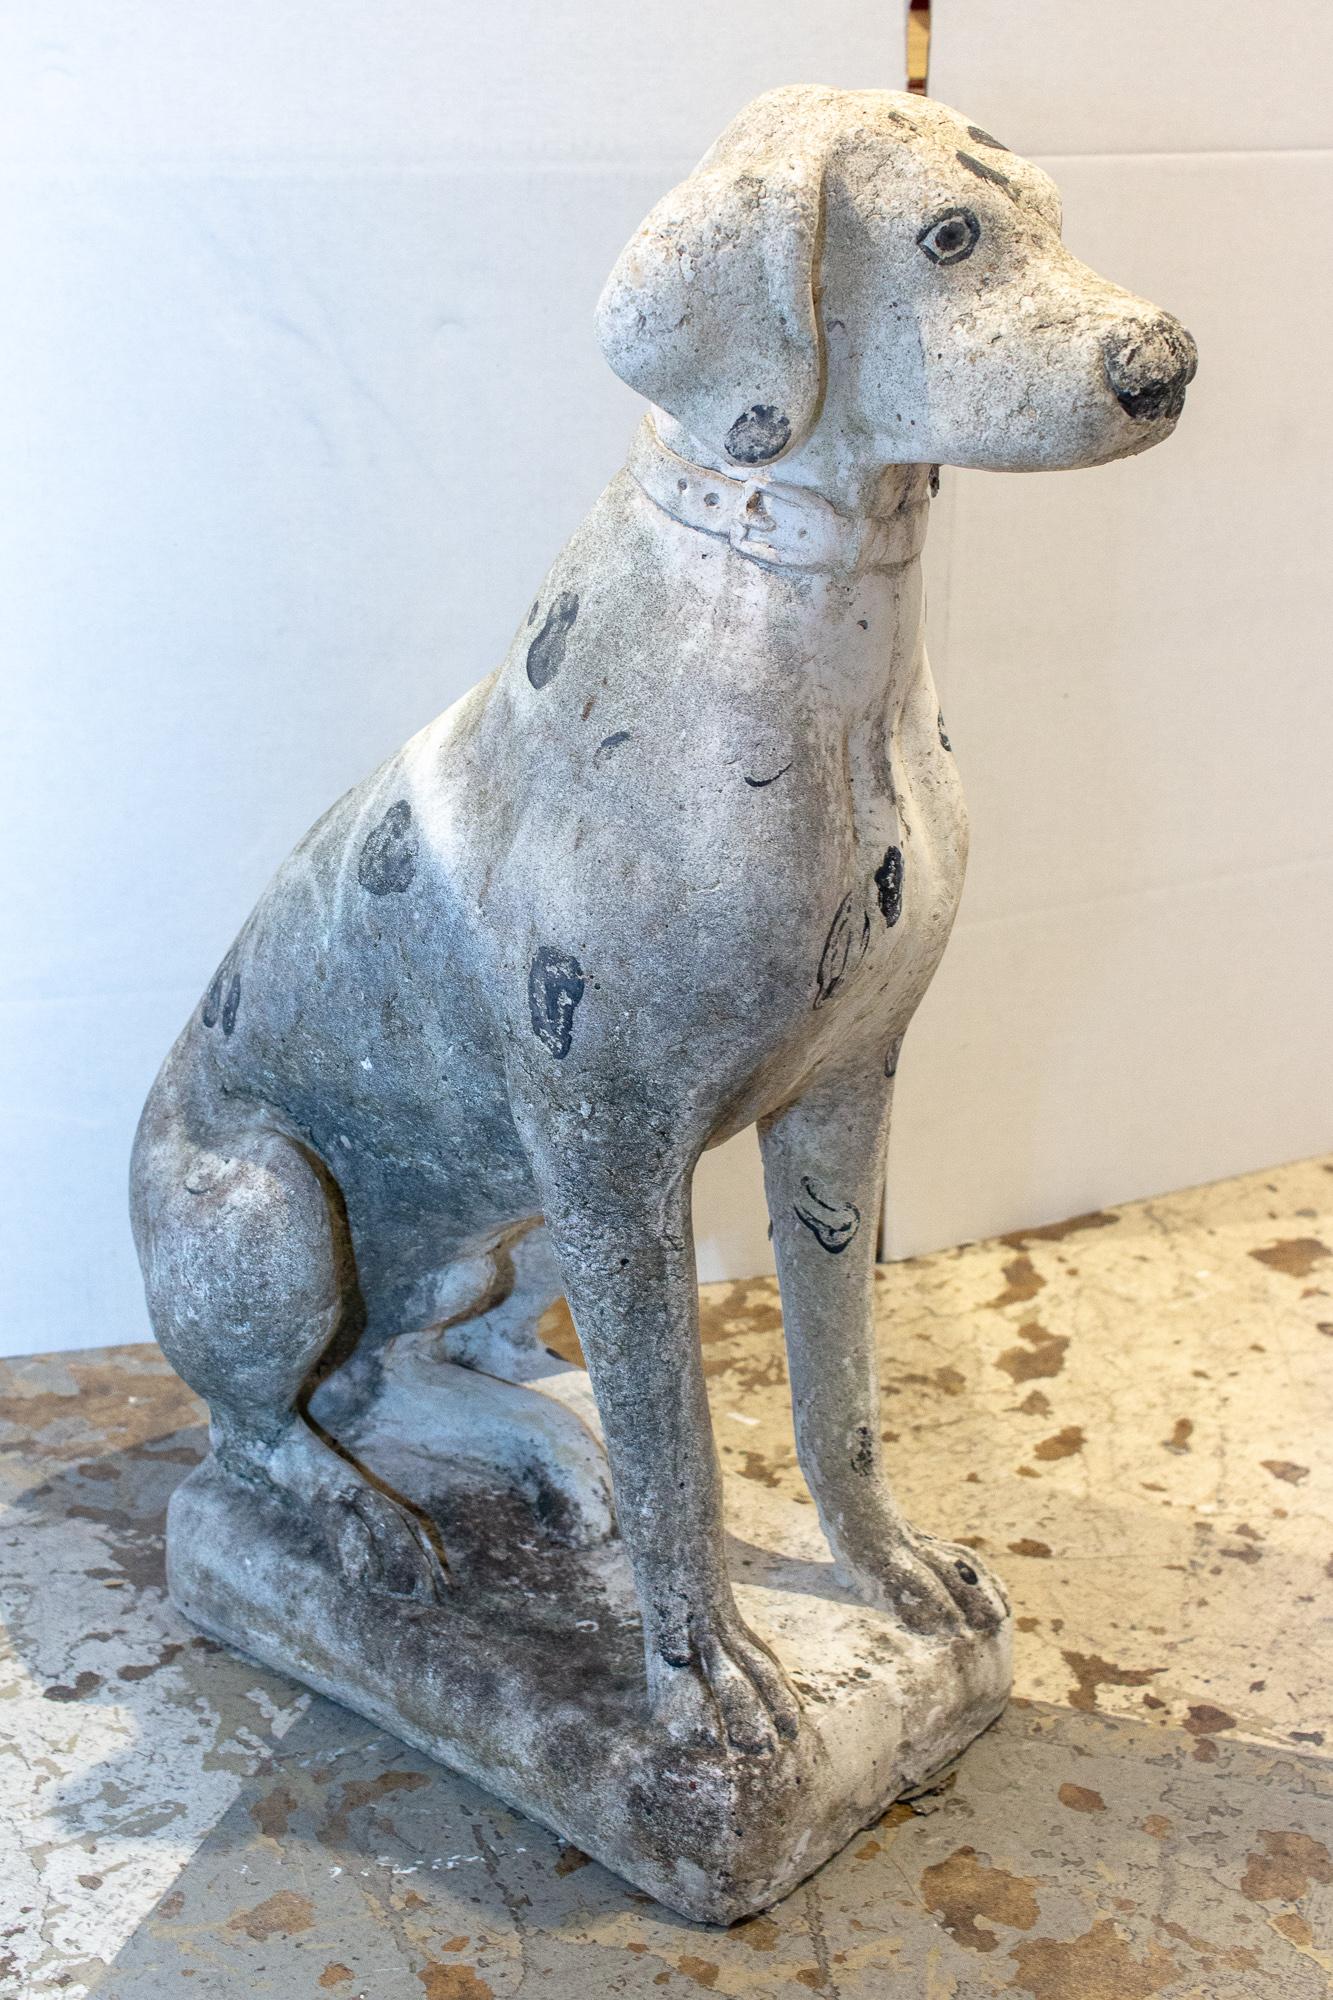 A sweet find from our recent travels, this Dalmation stands at attention. Midcentury concrete stone statue with a lovely patina and whimsically painted spots, eye and nose. We just love him as our newest addition as a shop dog welcoming clients into